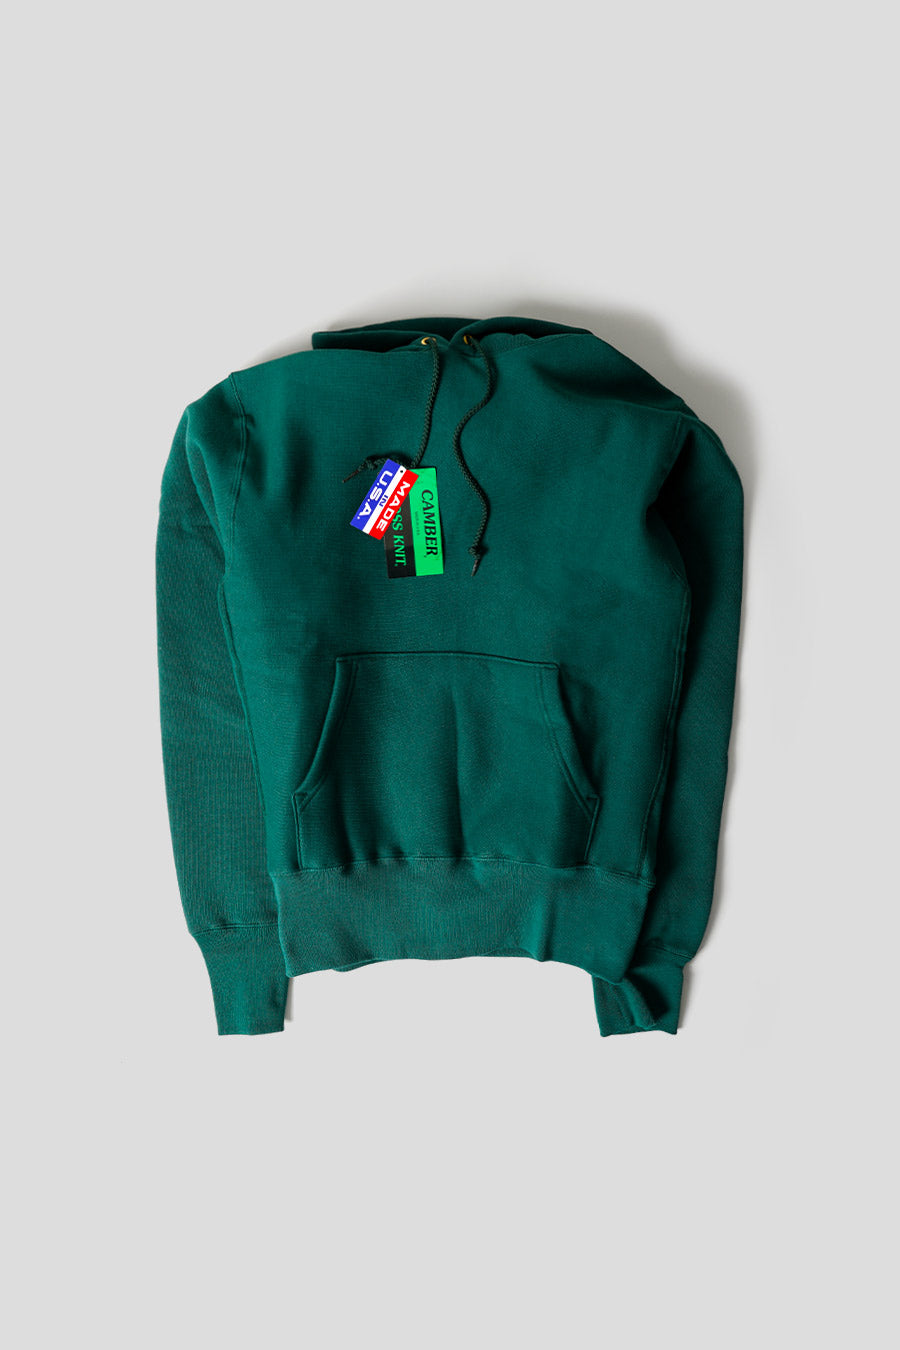 CAMBER USA - HOODIE CROSS-KNIT VERT - LE LABO STORE